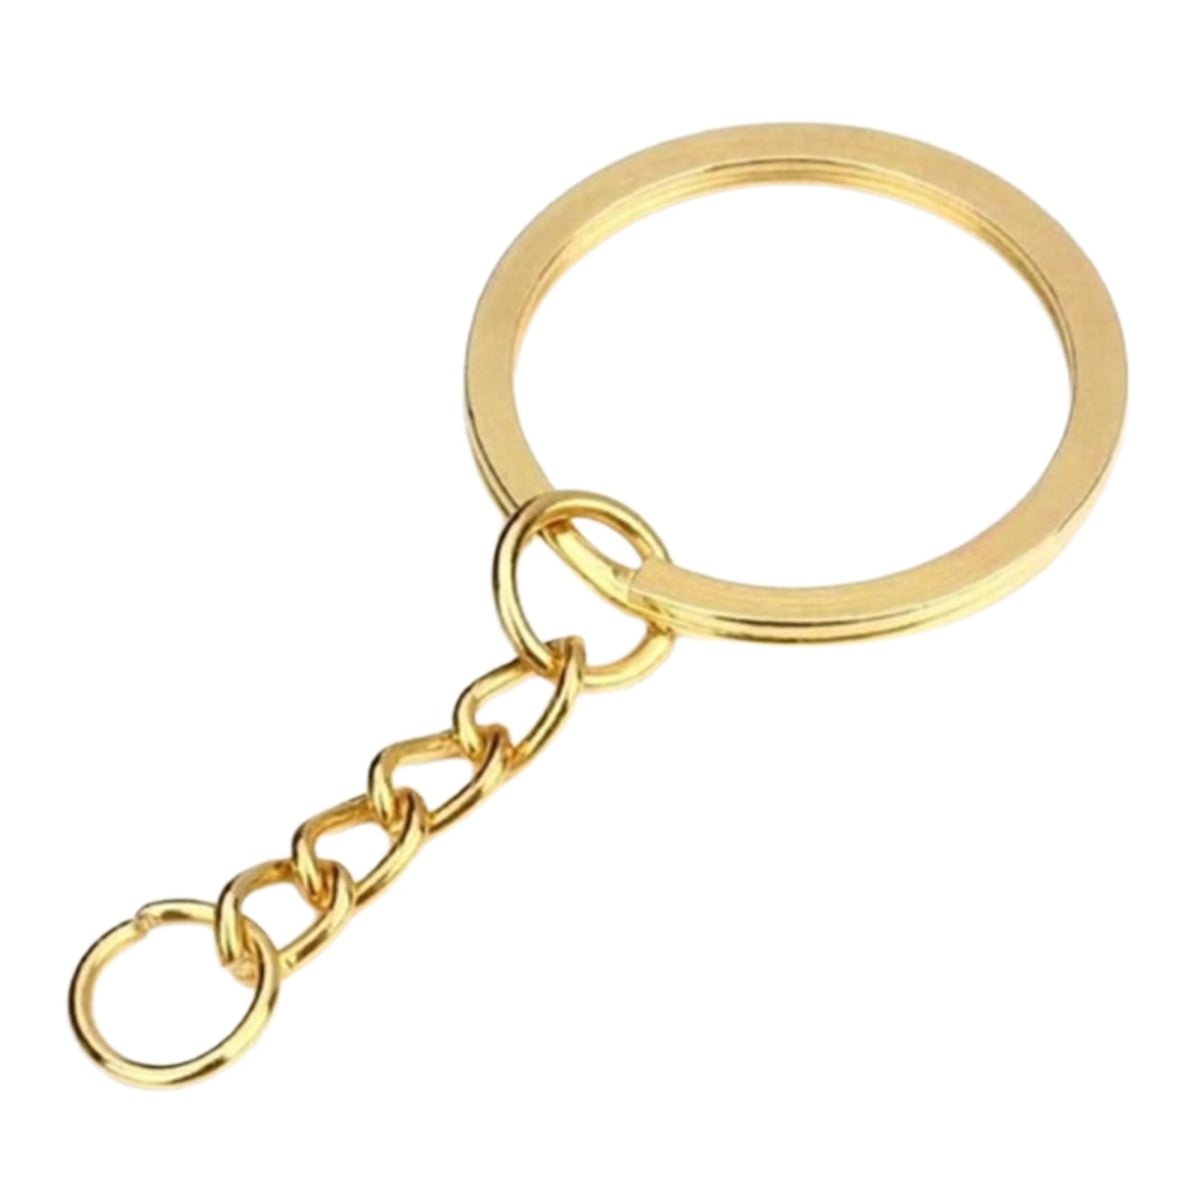 20pcs 25mm Gold Ancient Keyring Keychain Split Ring Chain Key Rings Key Chains - Gold - - Asia Sell